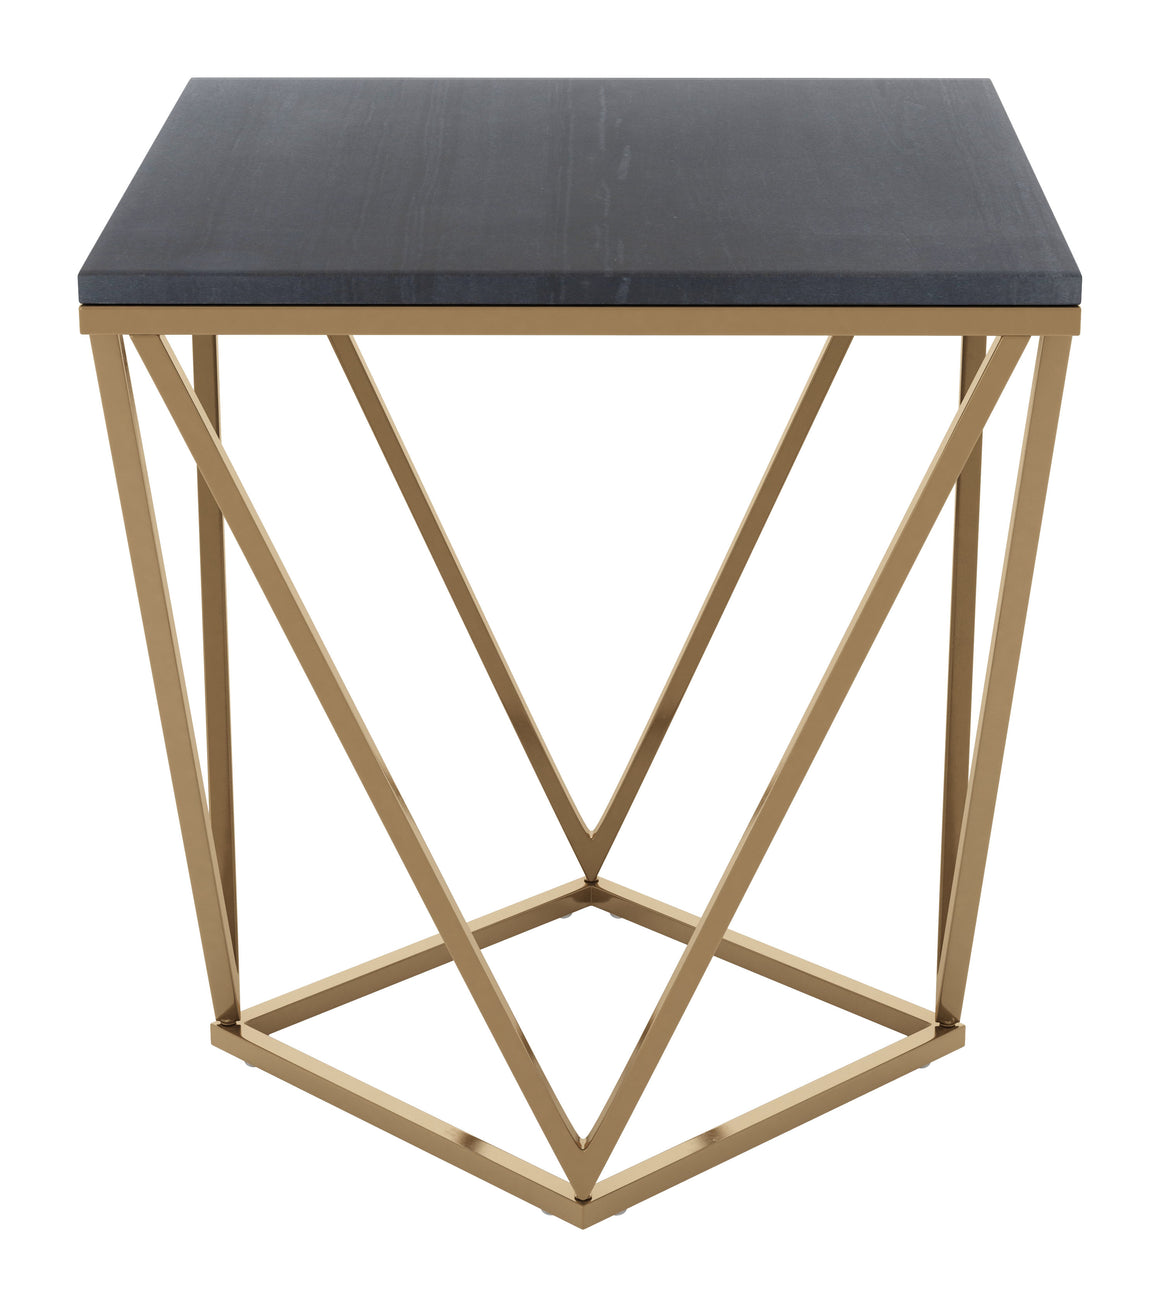 Verona Marble Side Table Black & Antique Brass